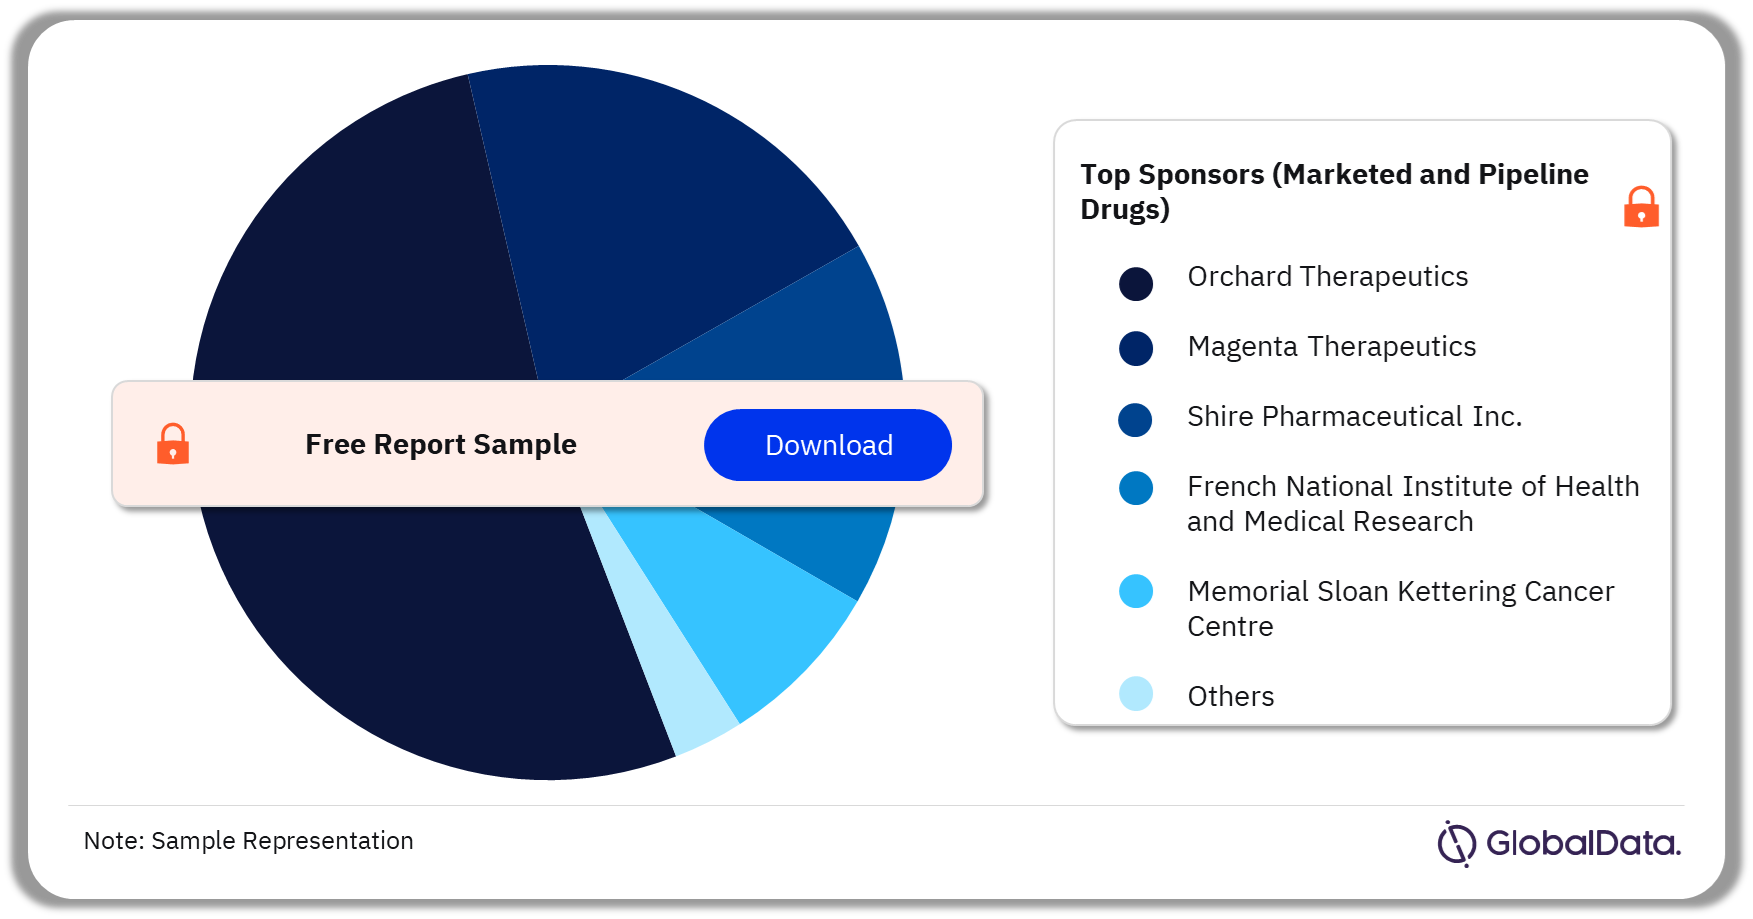 MLD Marketed and Pipeline Drugs Market Analysis by Sponsors, 2023 (%)